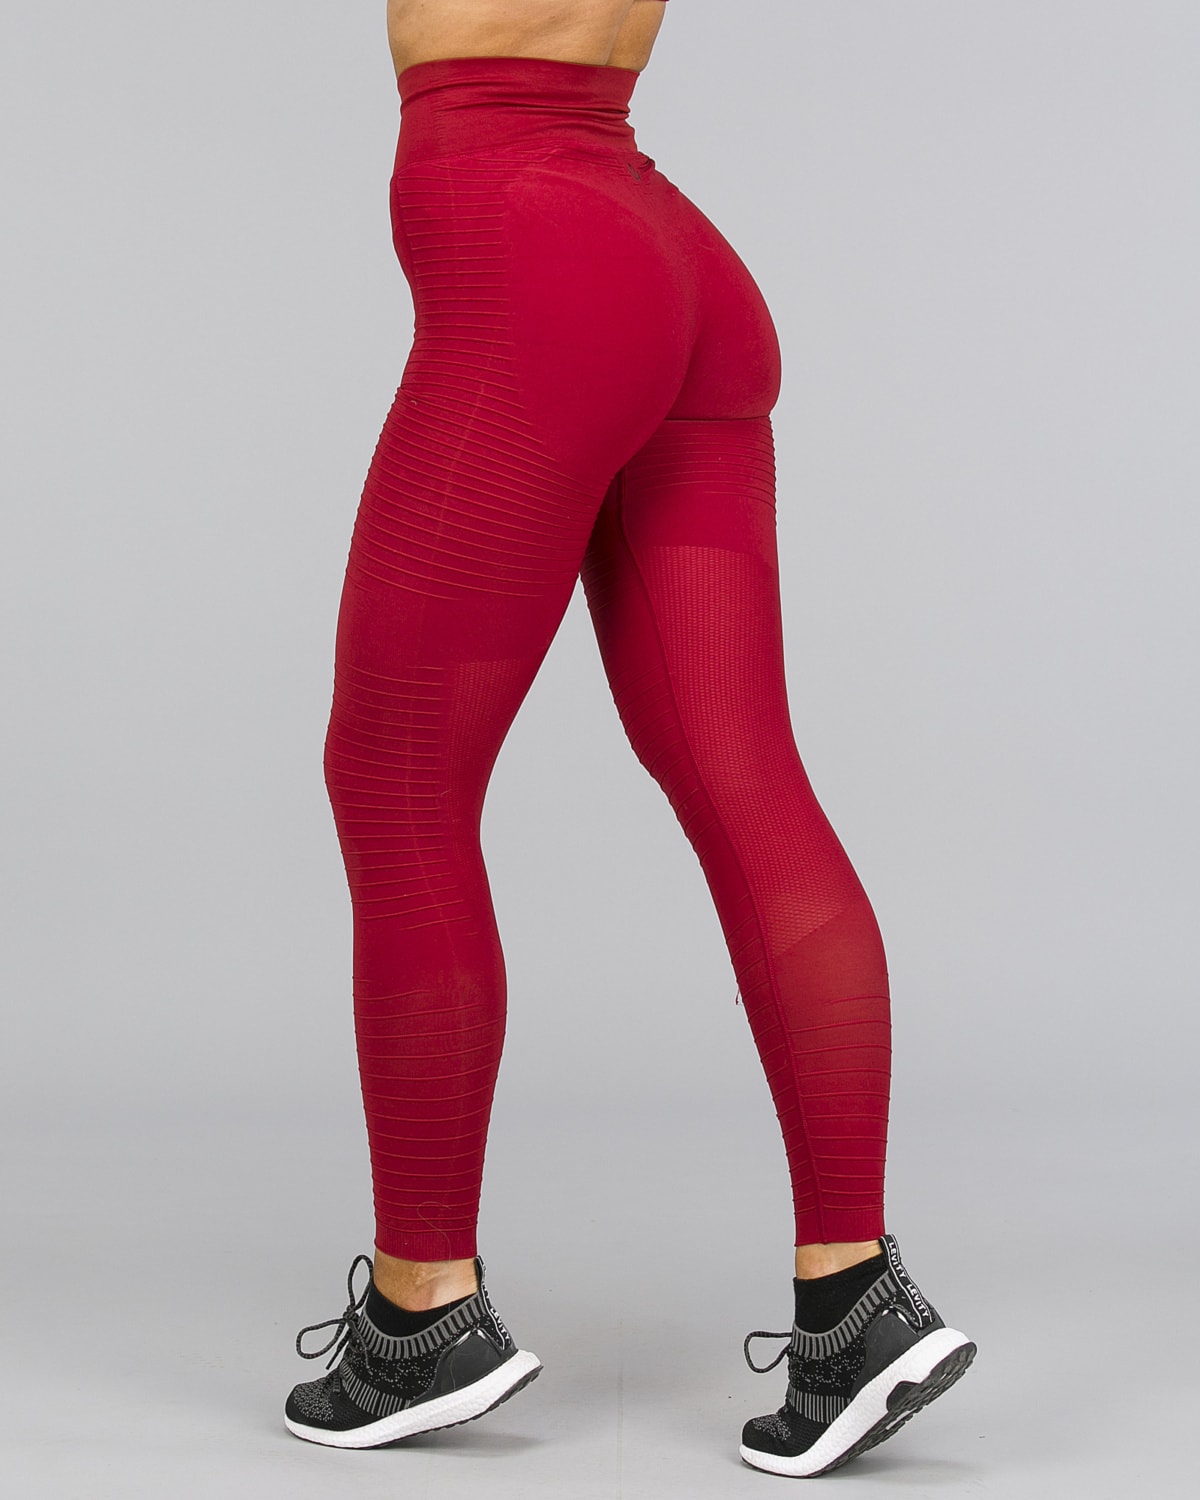  Red workout leggings for push your ABS